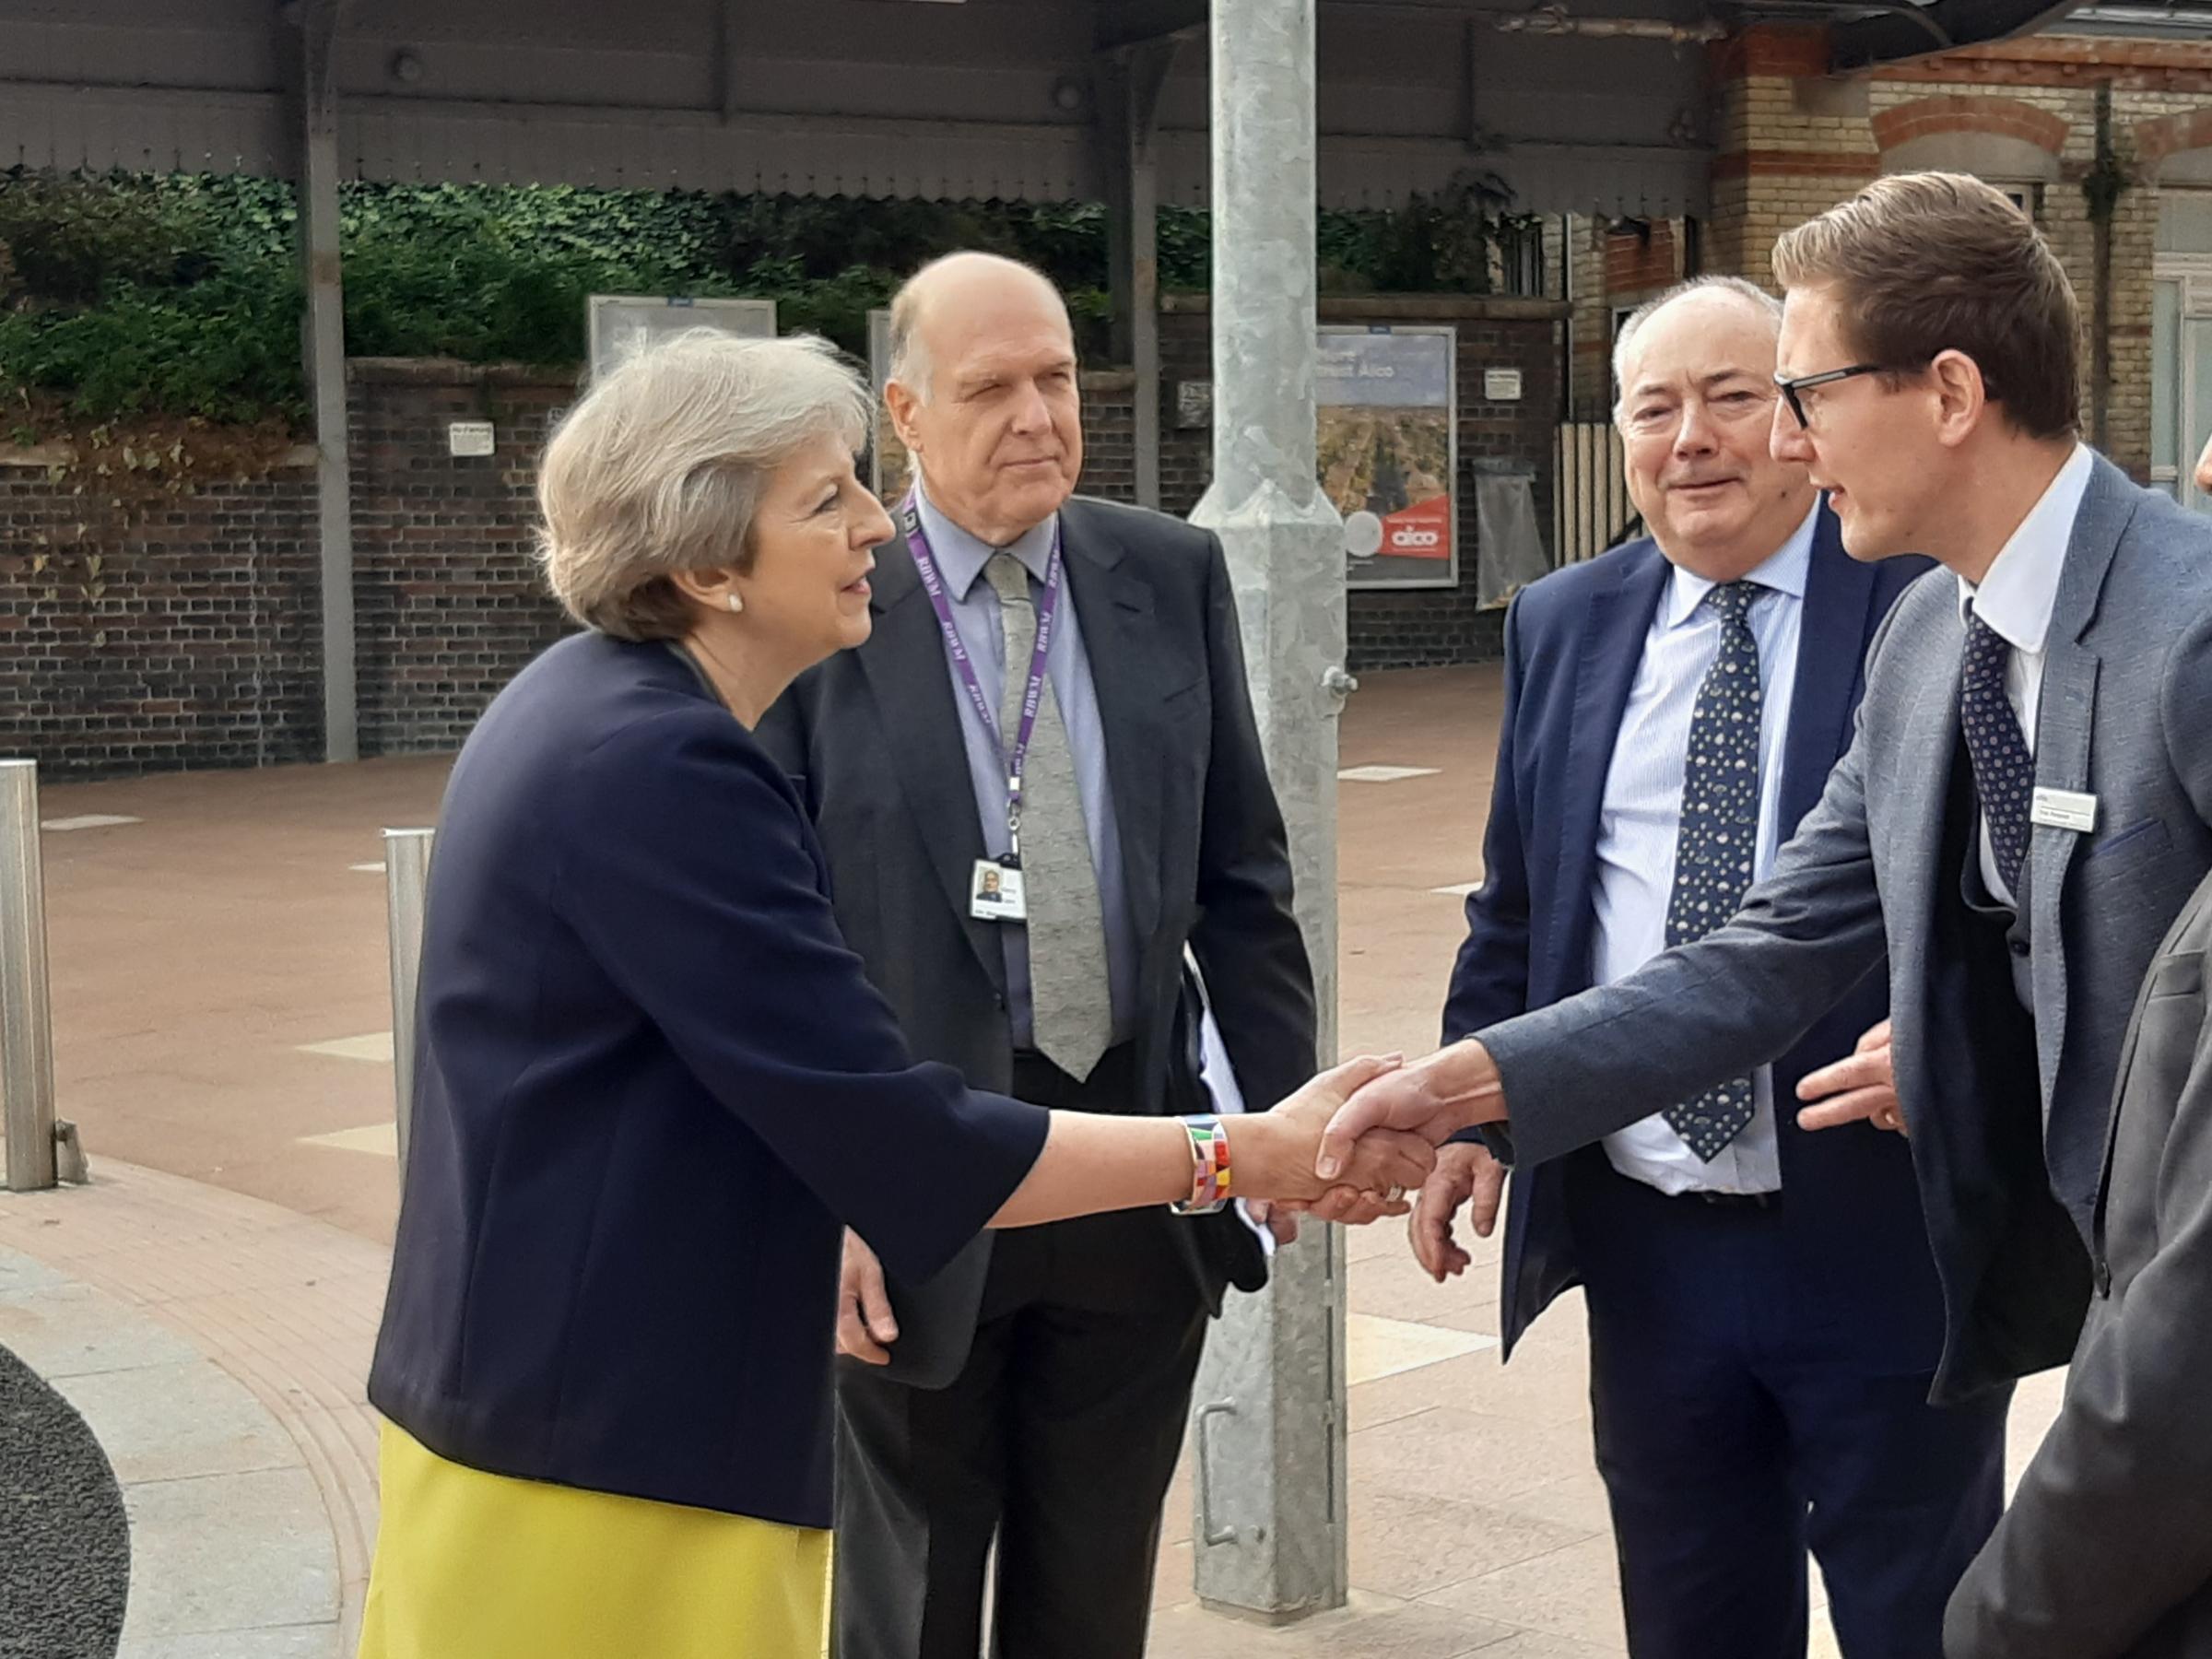 Theresa May shaking hands with Tom Pierpoint, businesses development director of GWR